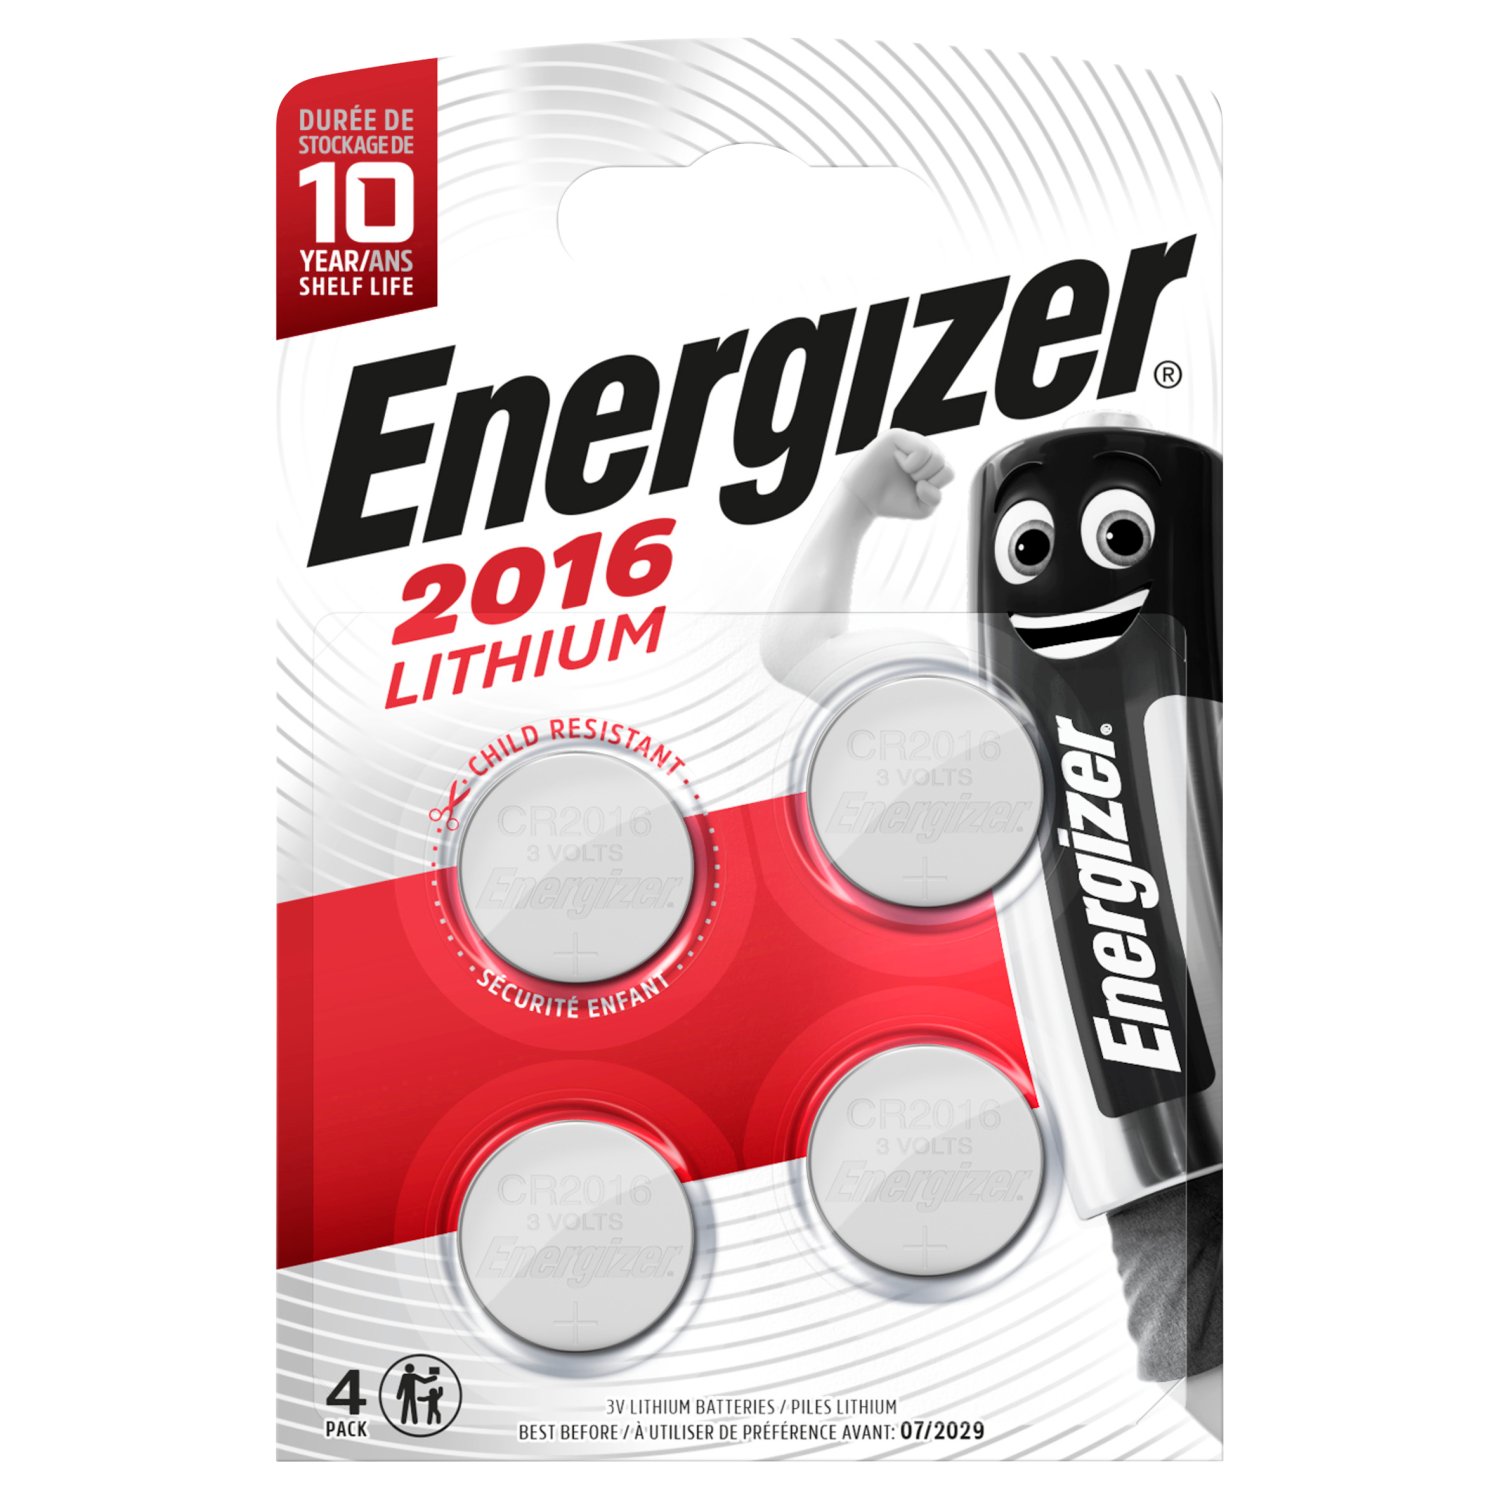 Energizer 2016 Lithium Coin Batteries 4 Pack (4 Piece)